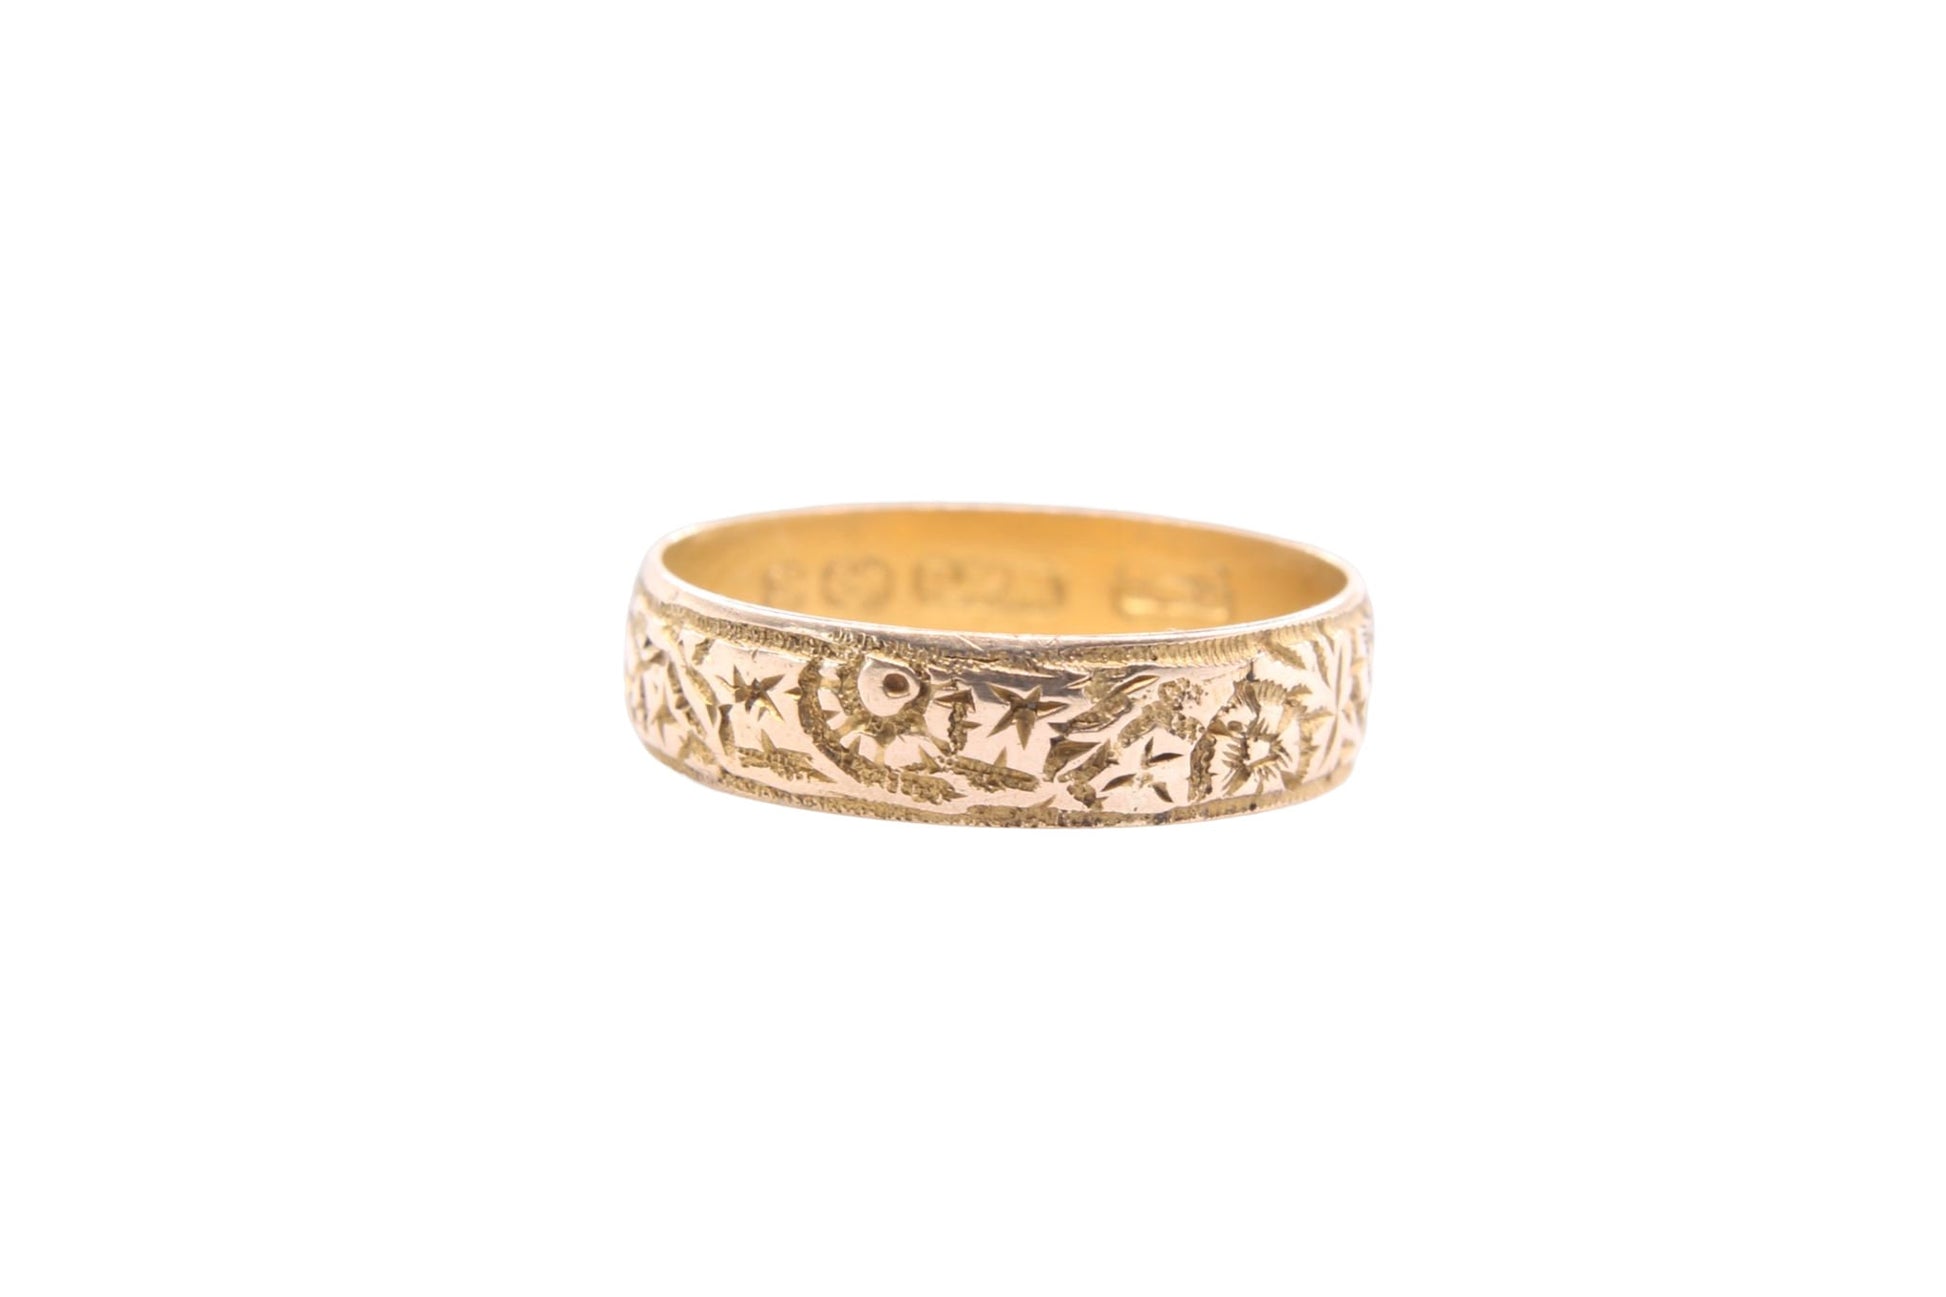 antique-victorian-floral-chased-18ct-gold-ring-1897